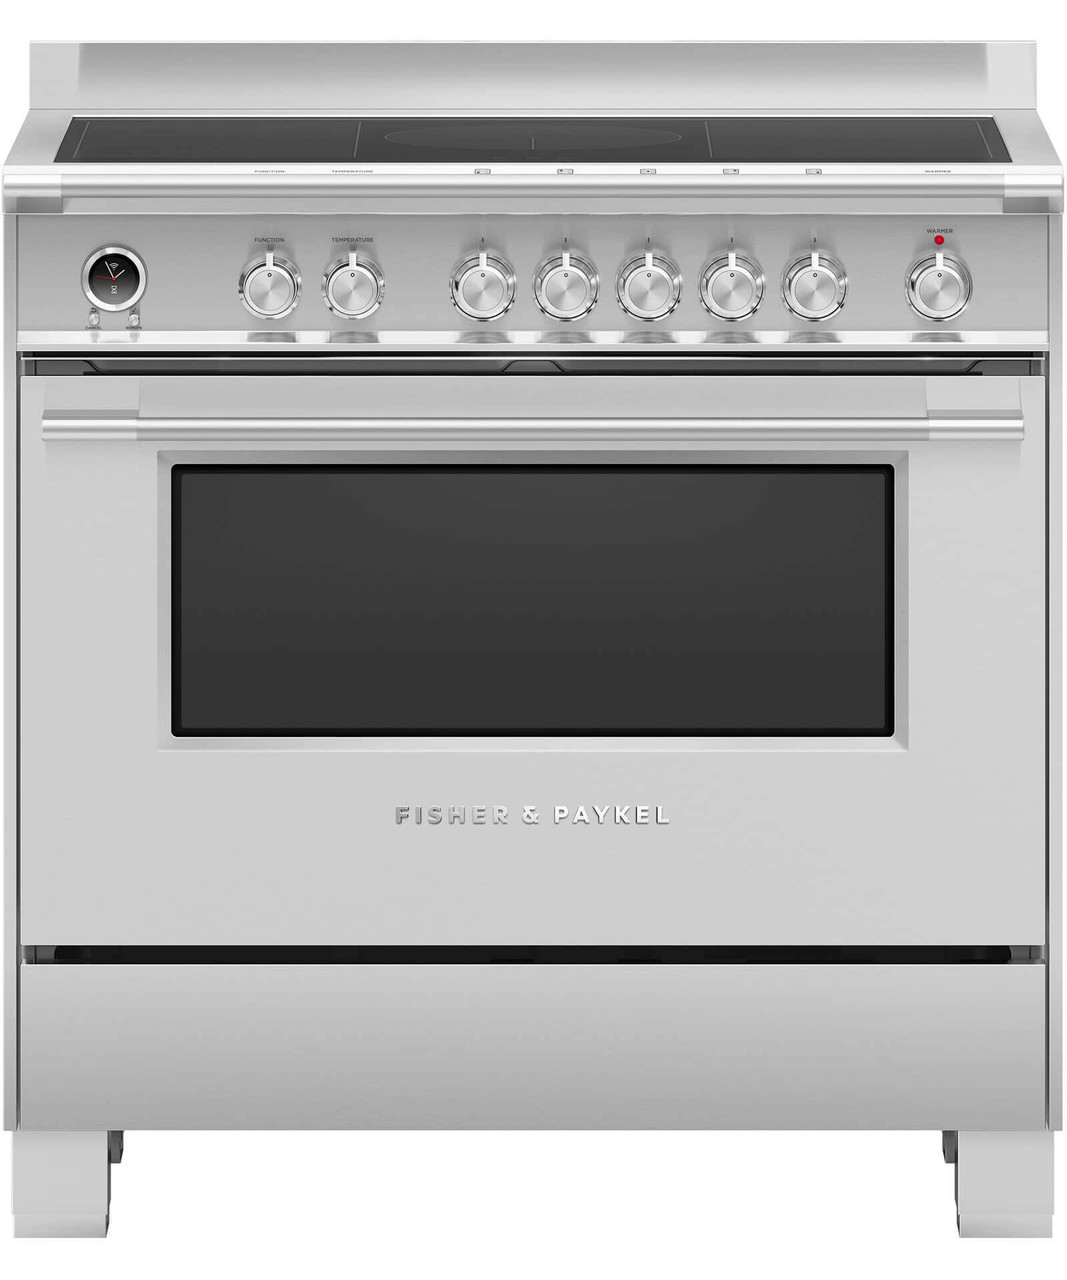 OR90SCI6X1 - 90cm Classic Style Freestanding Cooker, 5 Zone Induction - Stainless Steel